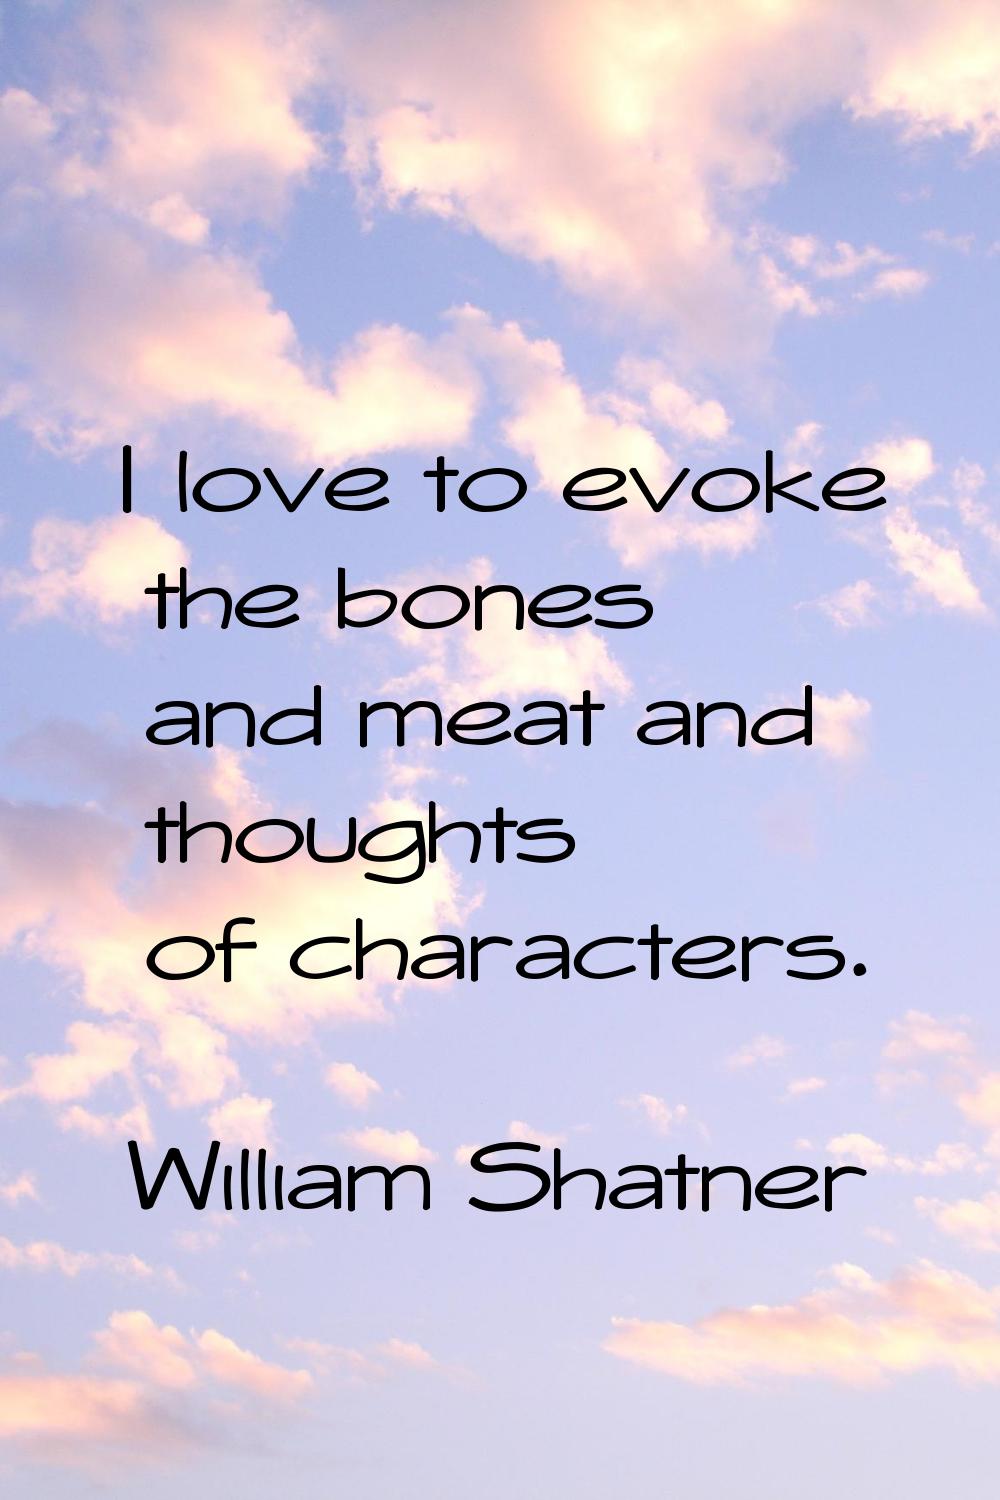 I love to evoke the bones and meat and thoughts of characters.